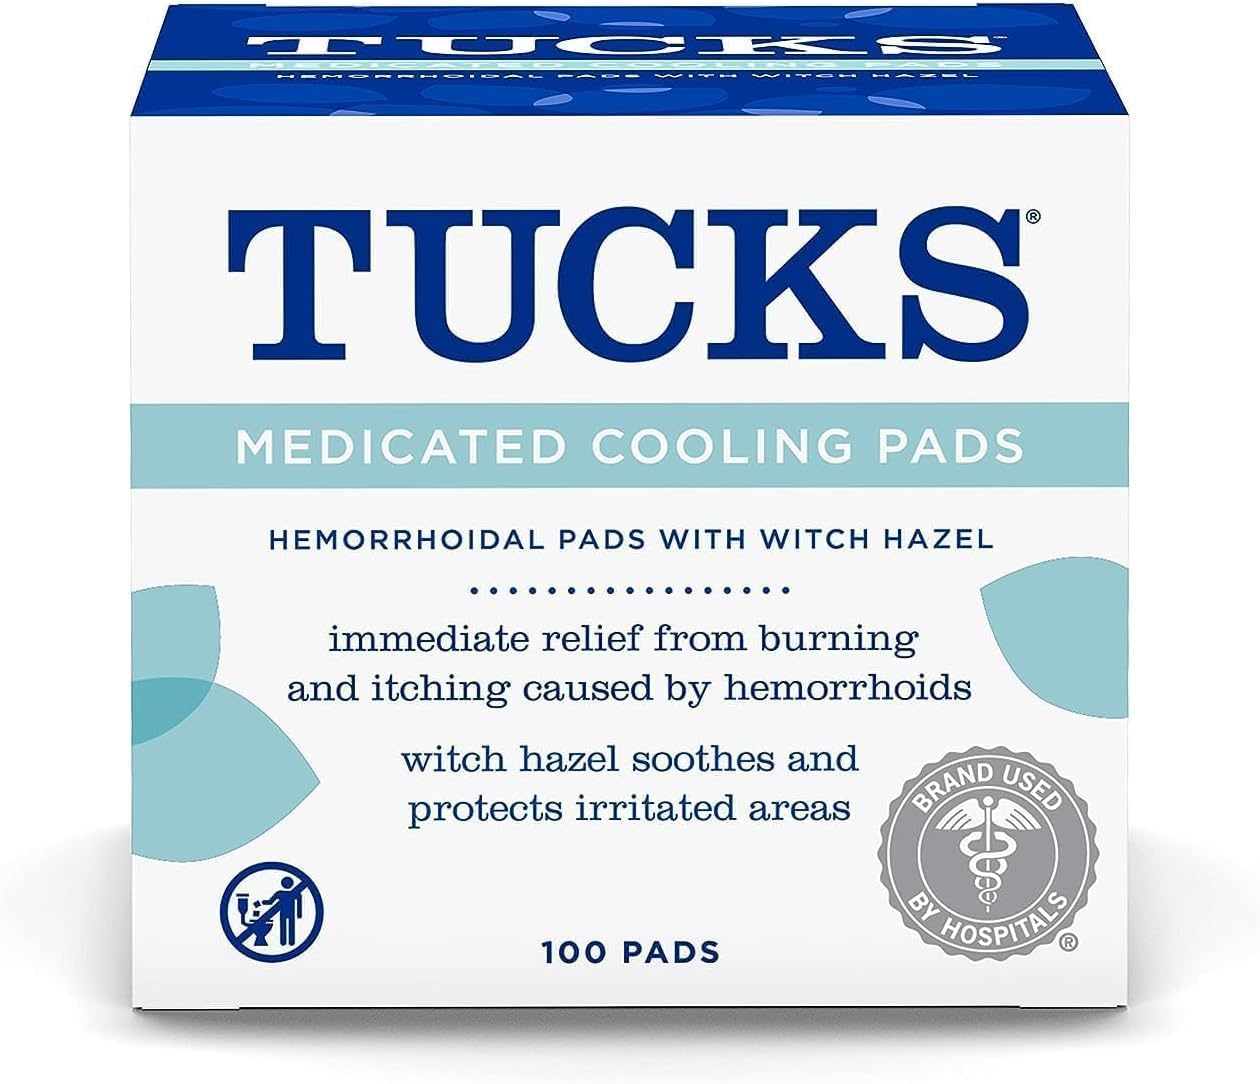 Tucks Multi-Care Relief Kit – 40 Count Witch Hazel Pads & 0.5 oz. Lidocaine Cream - Protects from Irritation, Hemorrhoid Treatment Medicated Pads Used by Hospitals